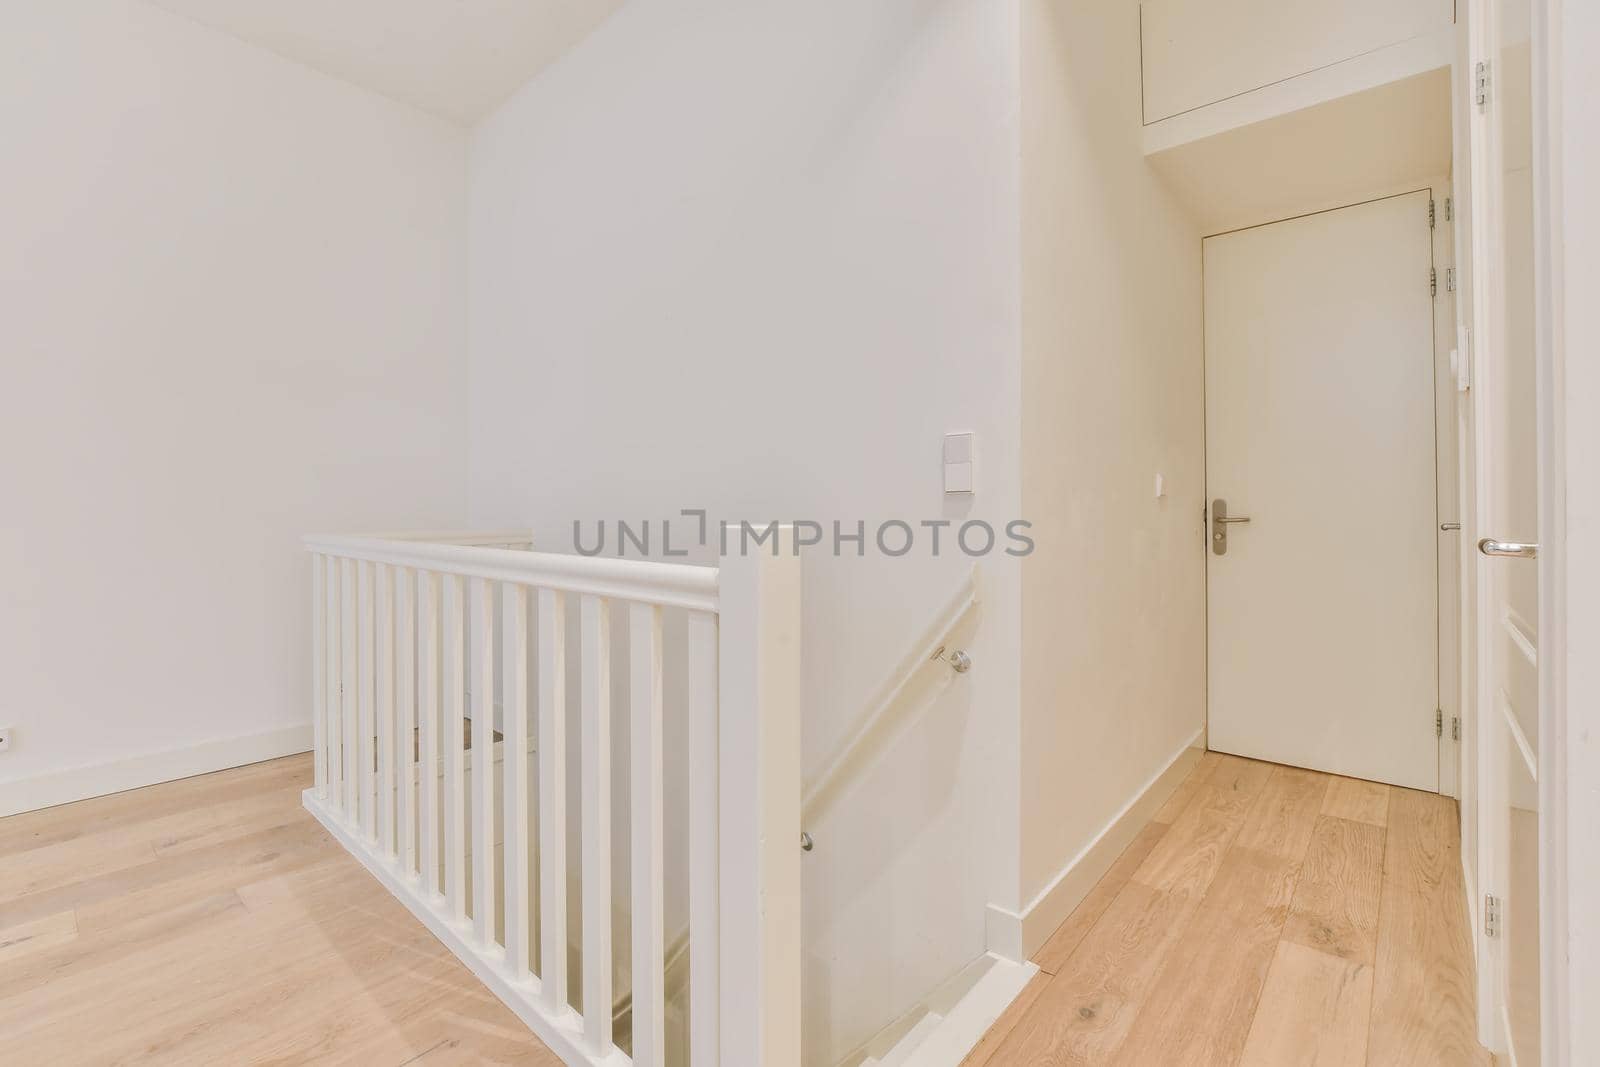 Luxurious bright room with parquet floor and staircase